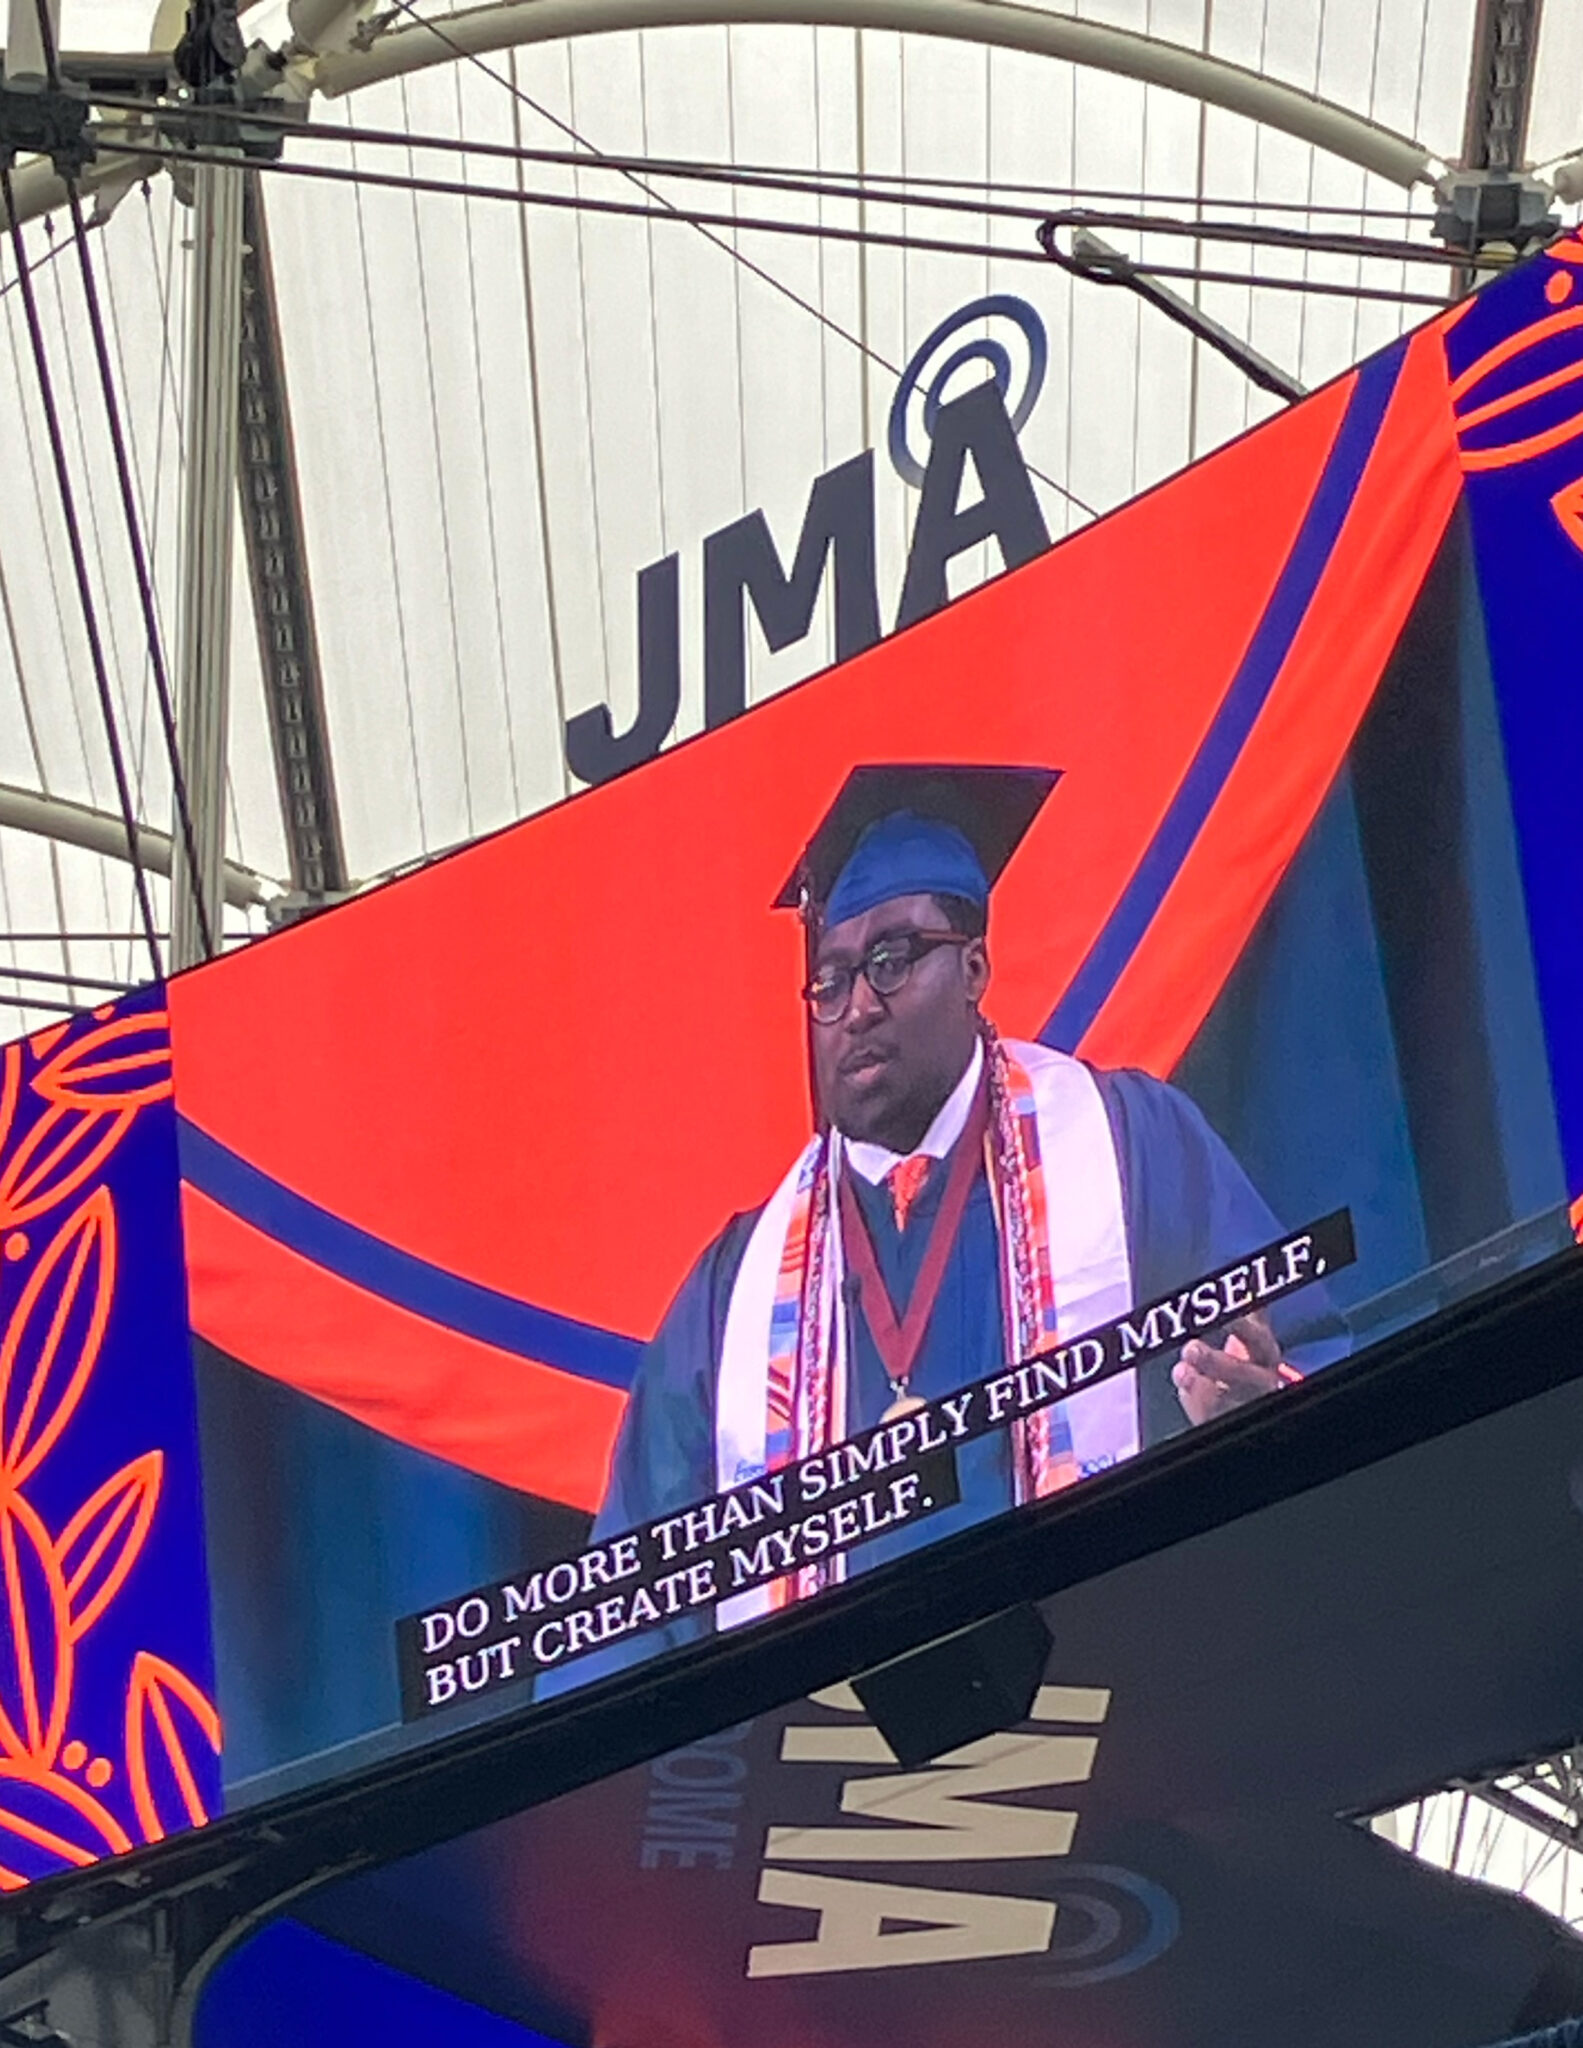 A man is shown on a video board speaking during a convocation ceremony